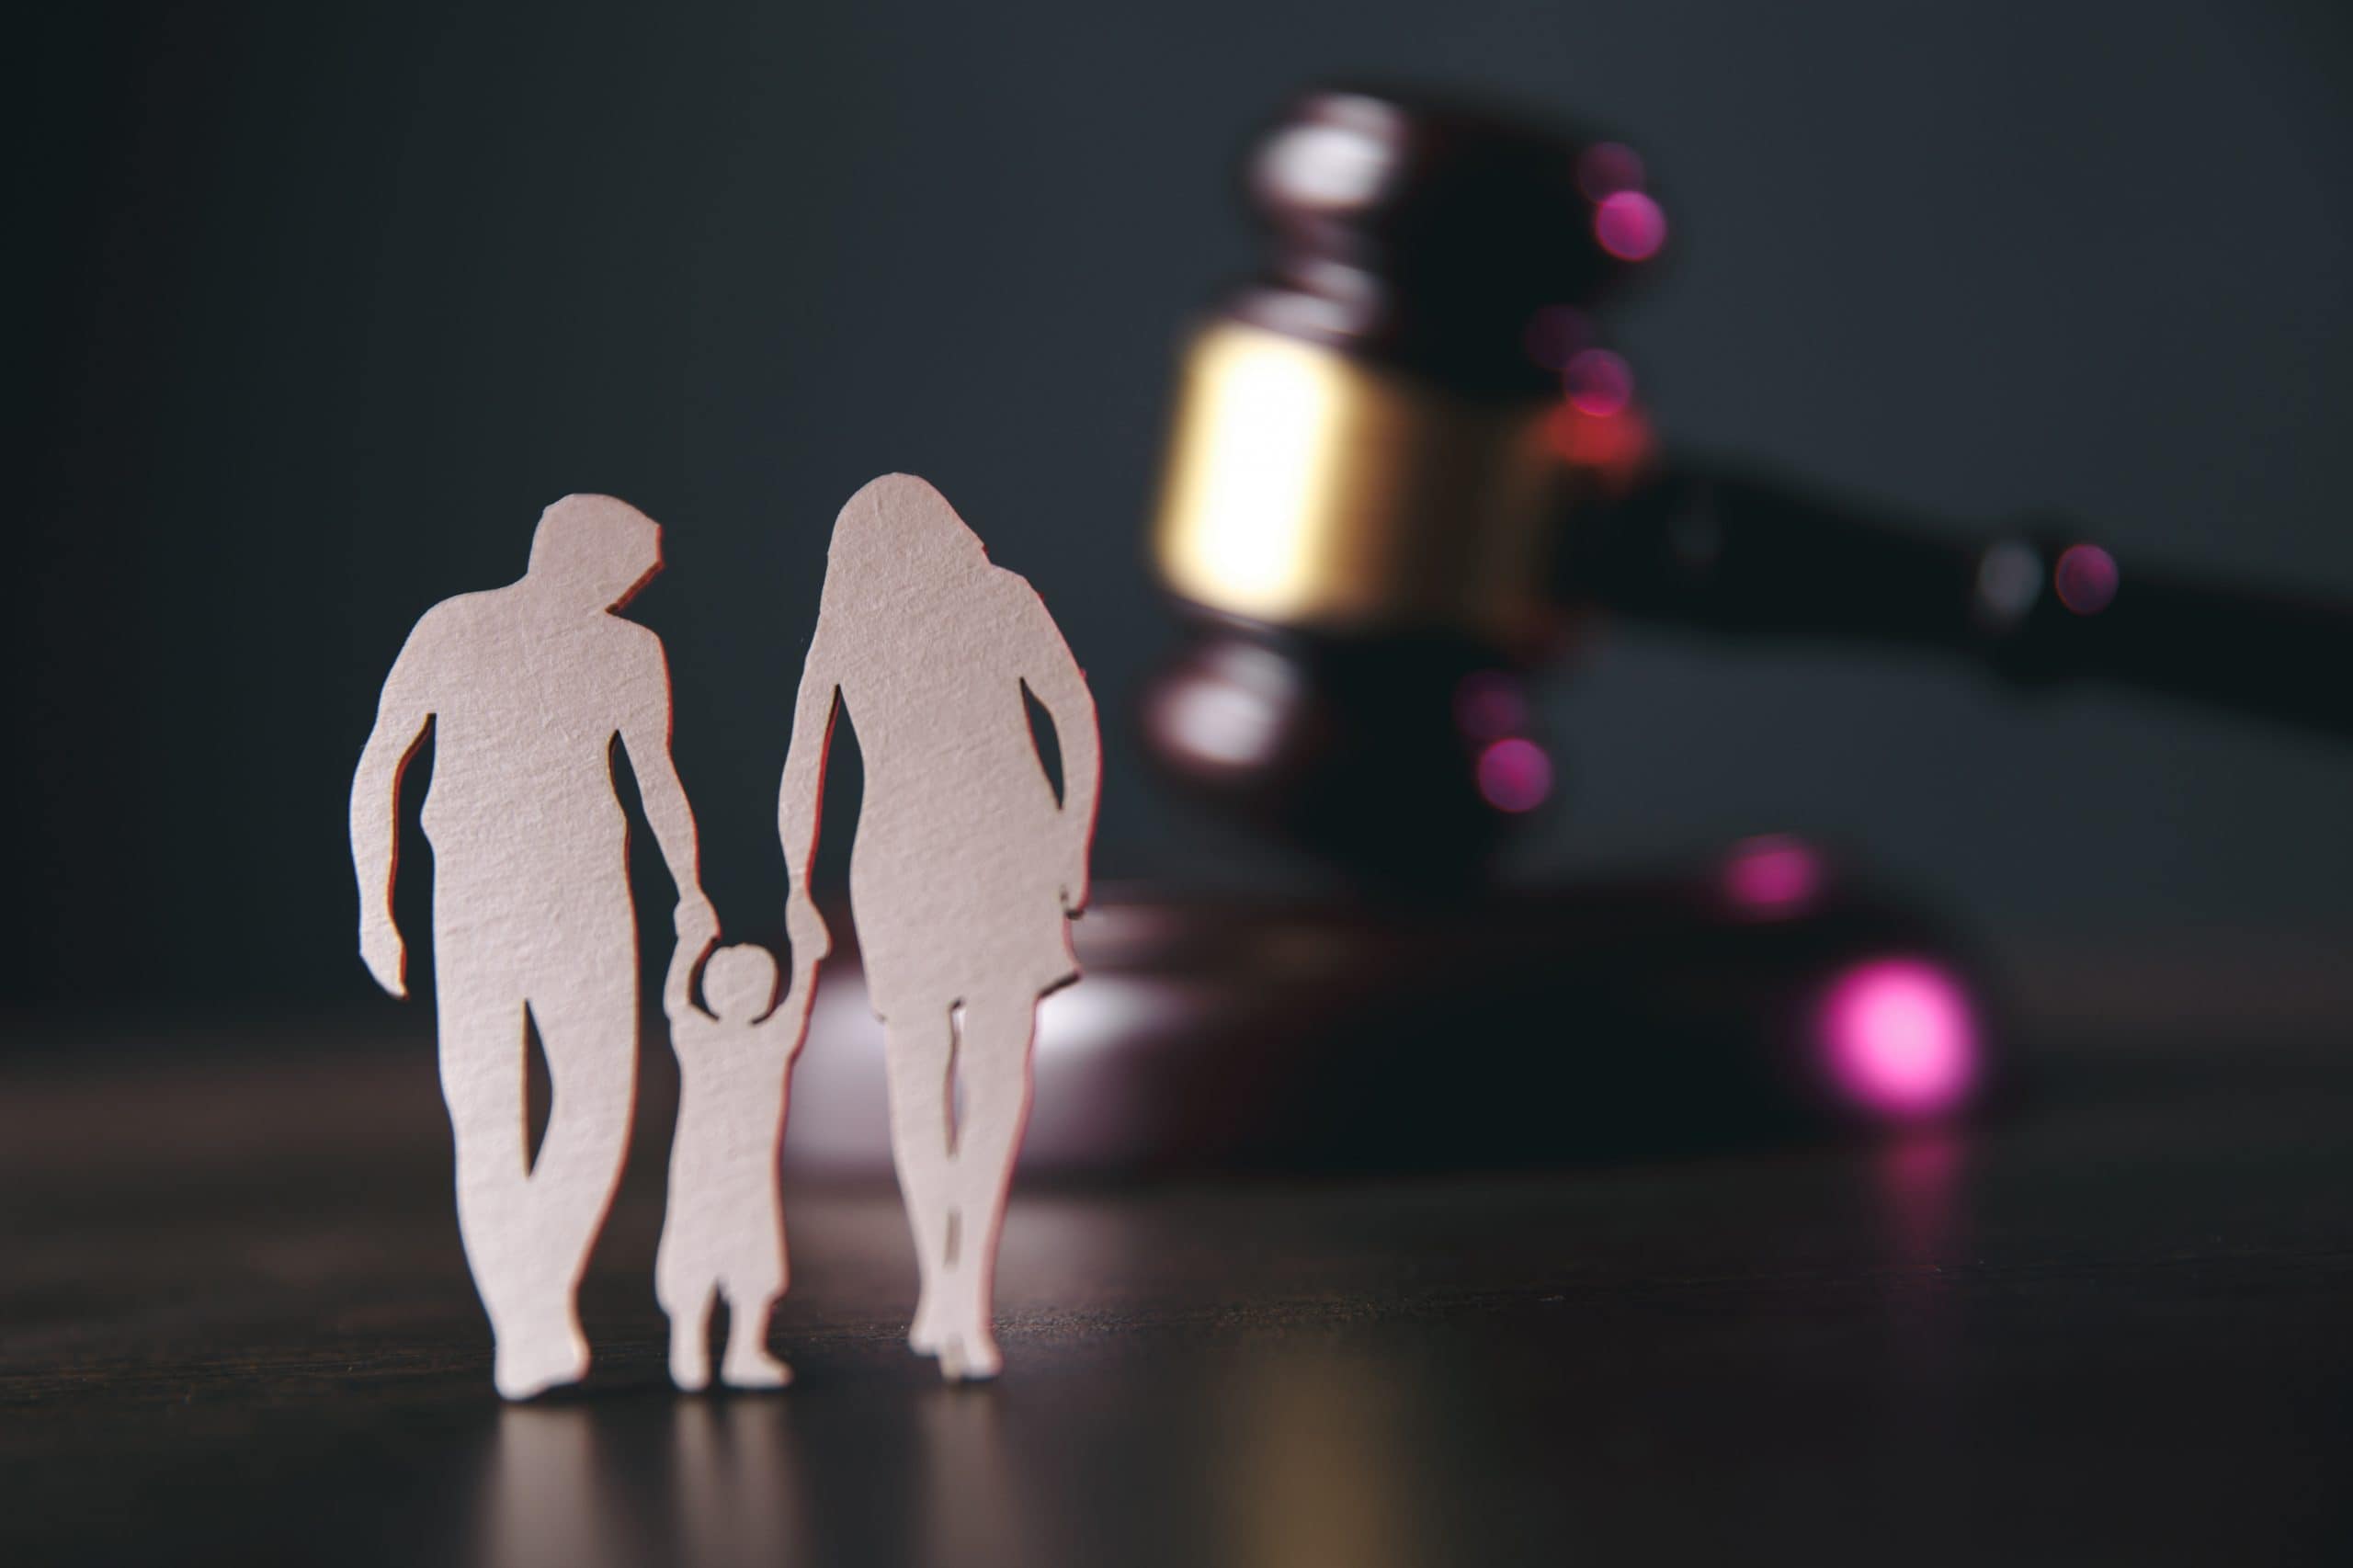 COVID-19: Family Law Legal Tips. Accompanying picture: Family figure and gavel on table